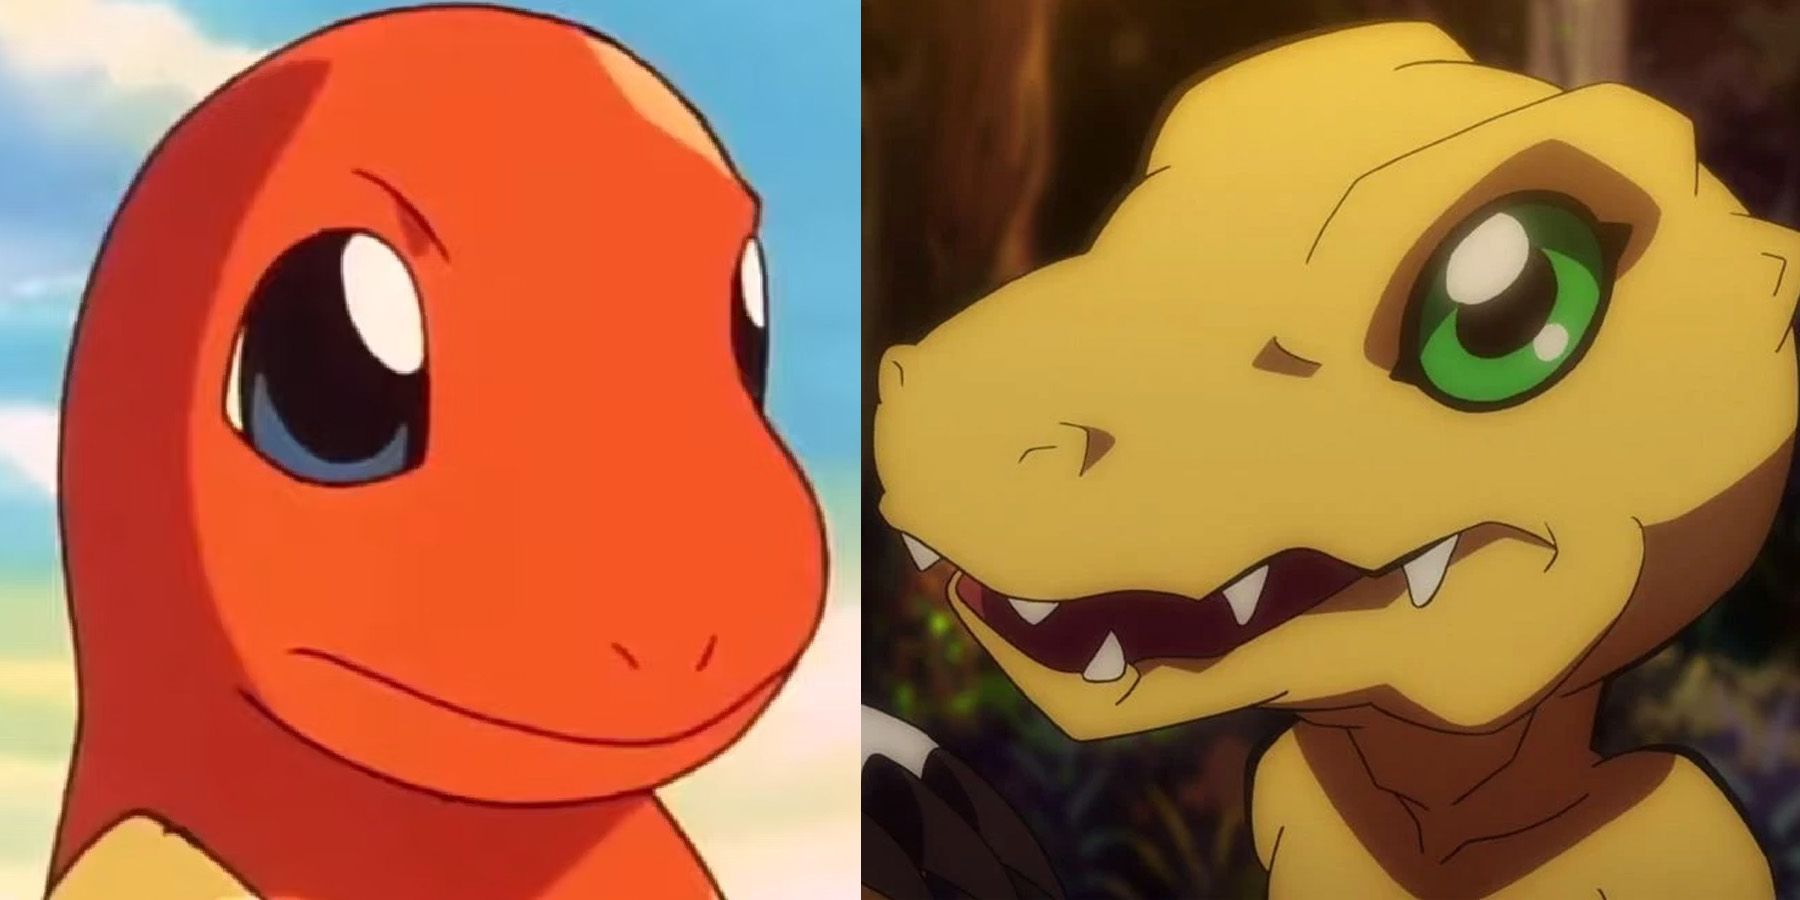 A close-up splitscreen image of Charmander from Pokemon and Augmon from Digimon.